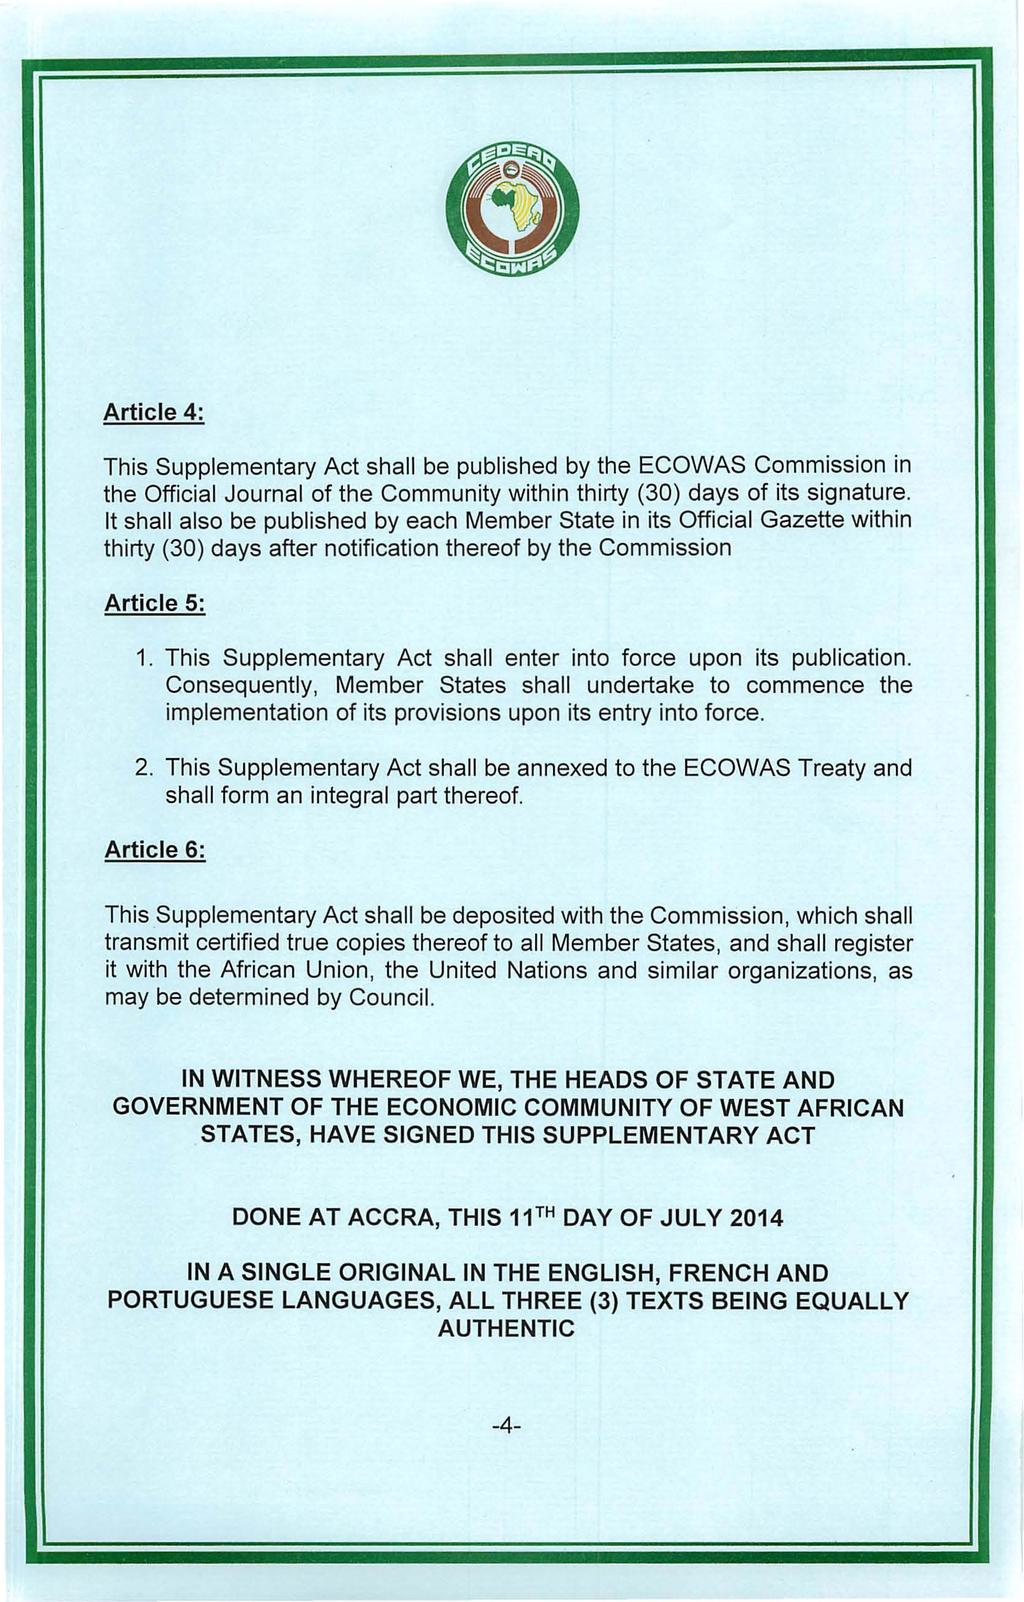 Article 4: This Supplementary Act shall be published by the ECOWAS Commission in the Official Journal of the Community within thirty (30) days of its signature.